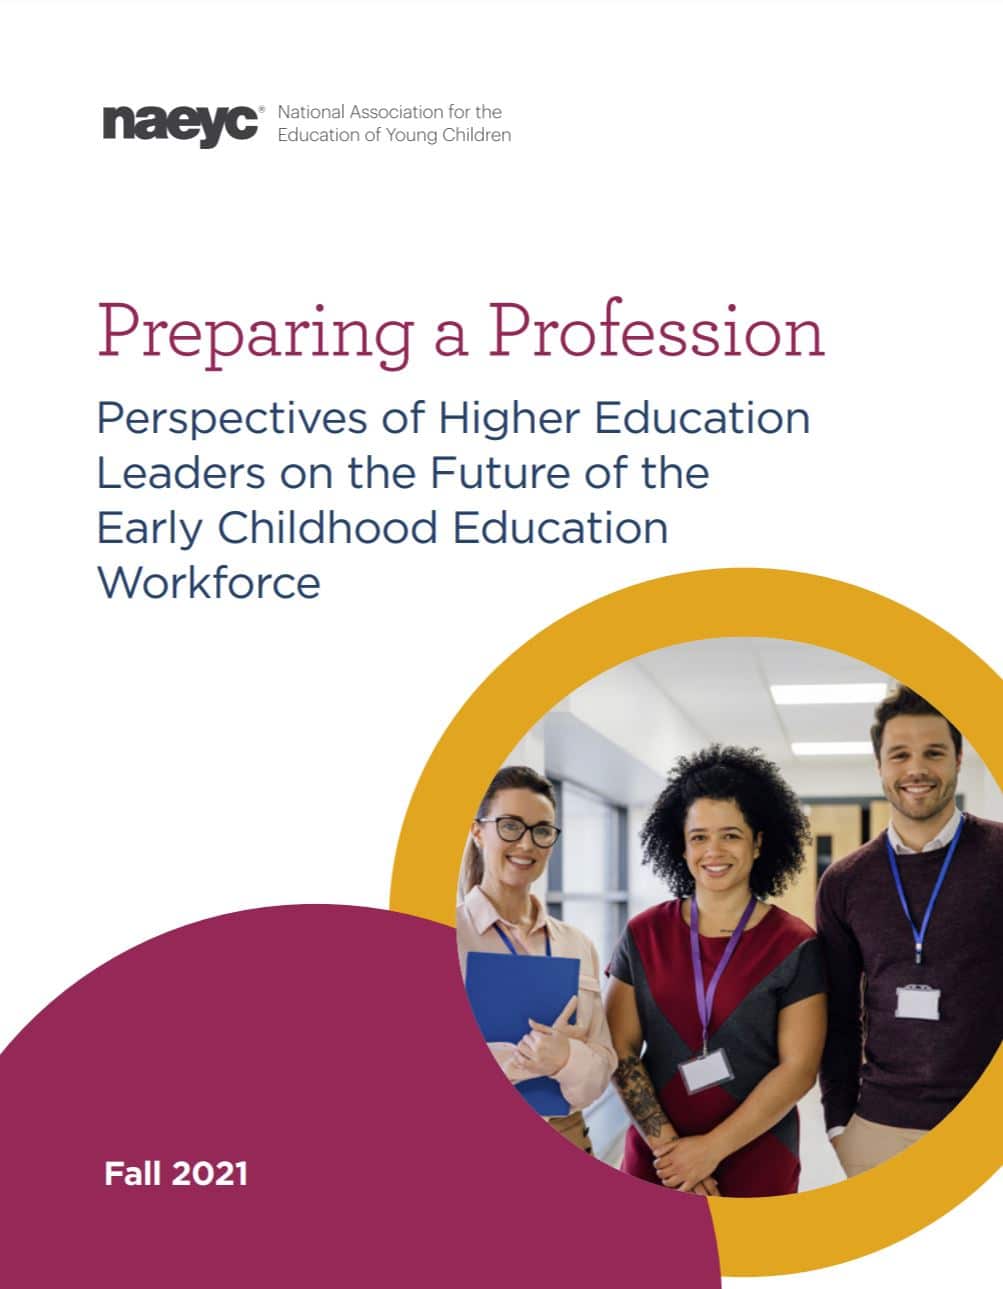 Preparing a Profession: Perspectives of Higher Education Leaders on the Future of the Early Childhood Education Workforce